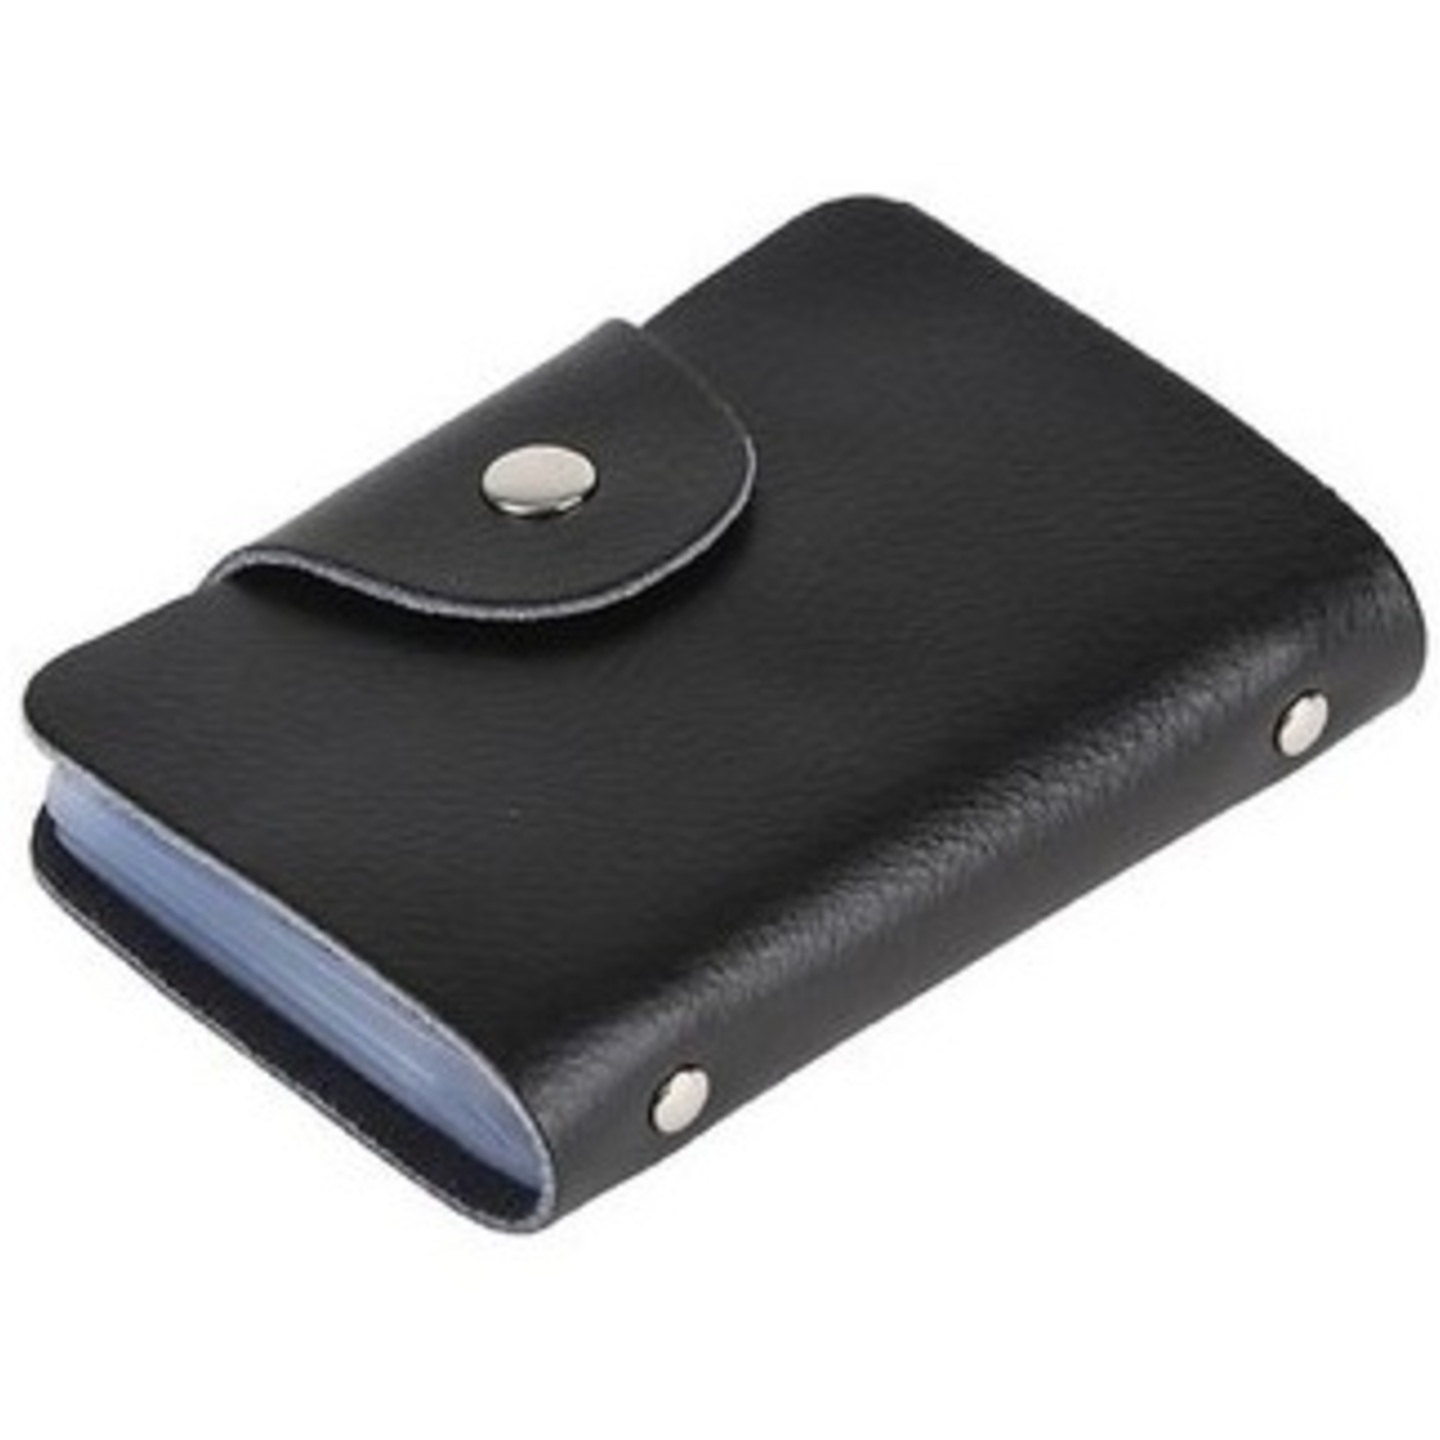 Classy Wallet for Holding Cards